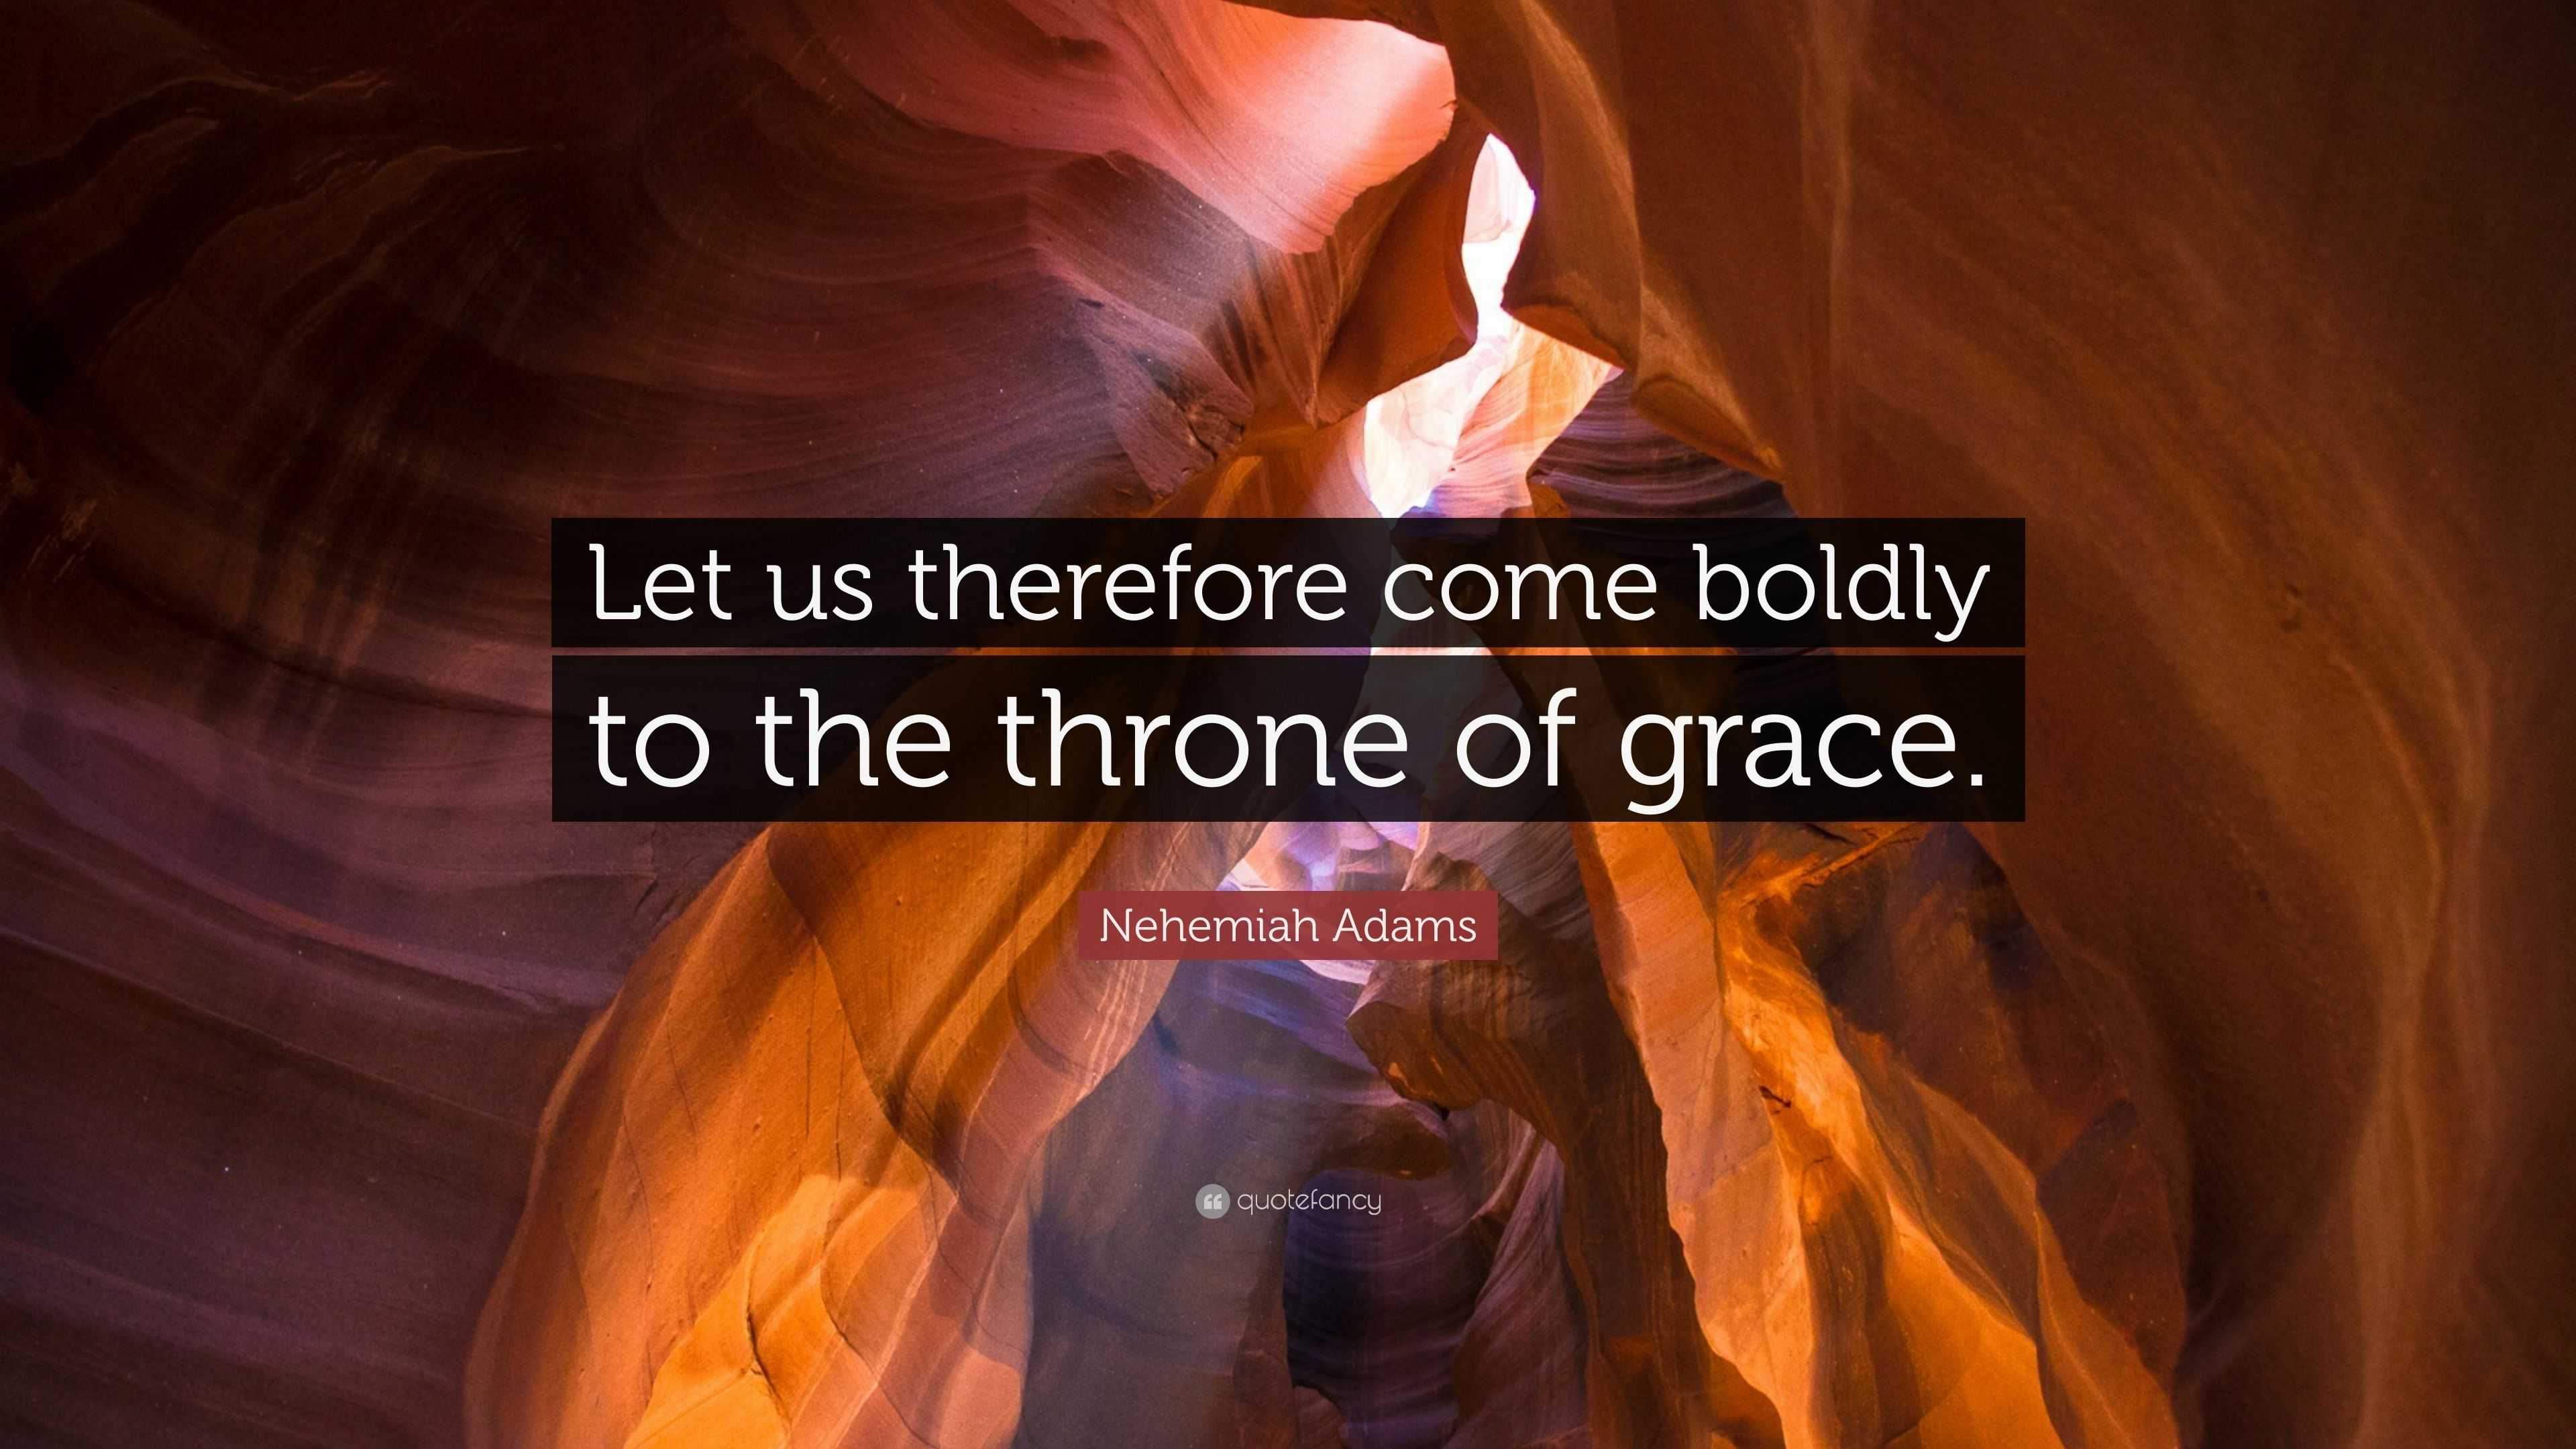 Nehemiah Adams Quote: “Let Us Therefore Come Boldly To The Throne Of Grace.”